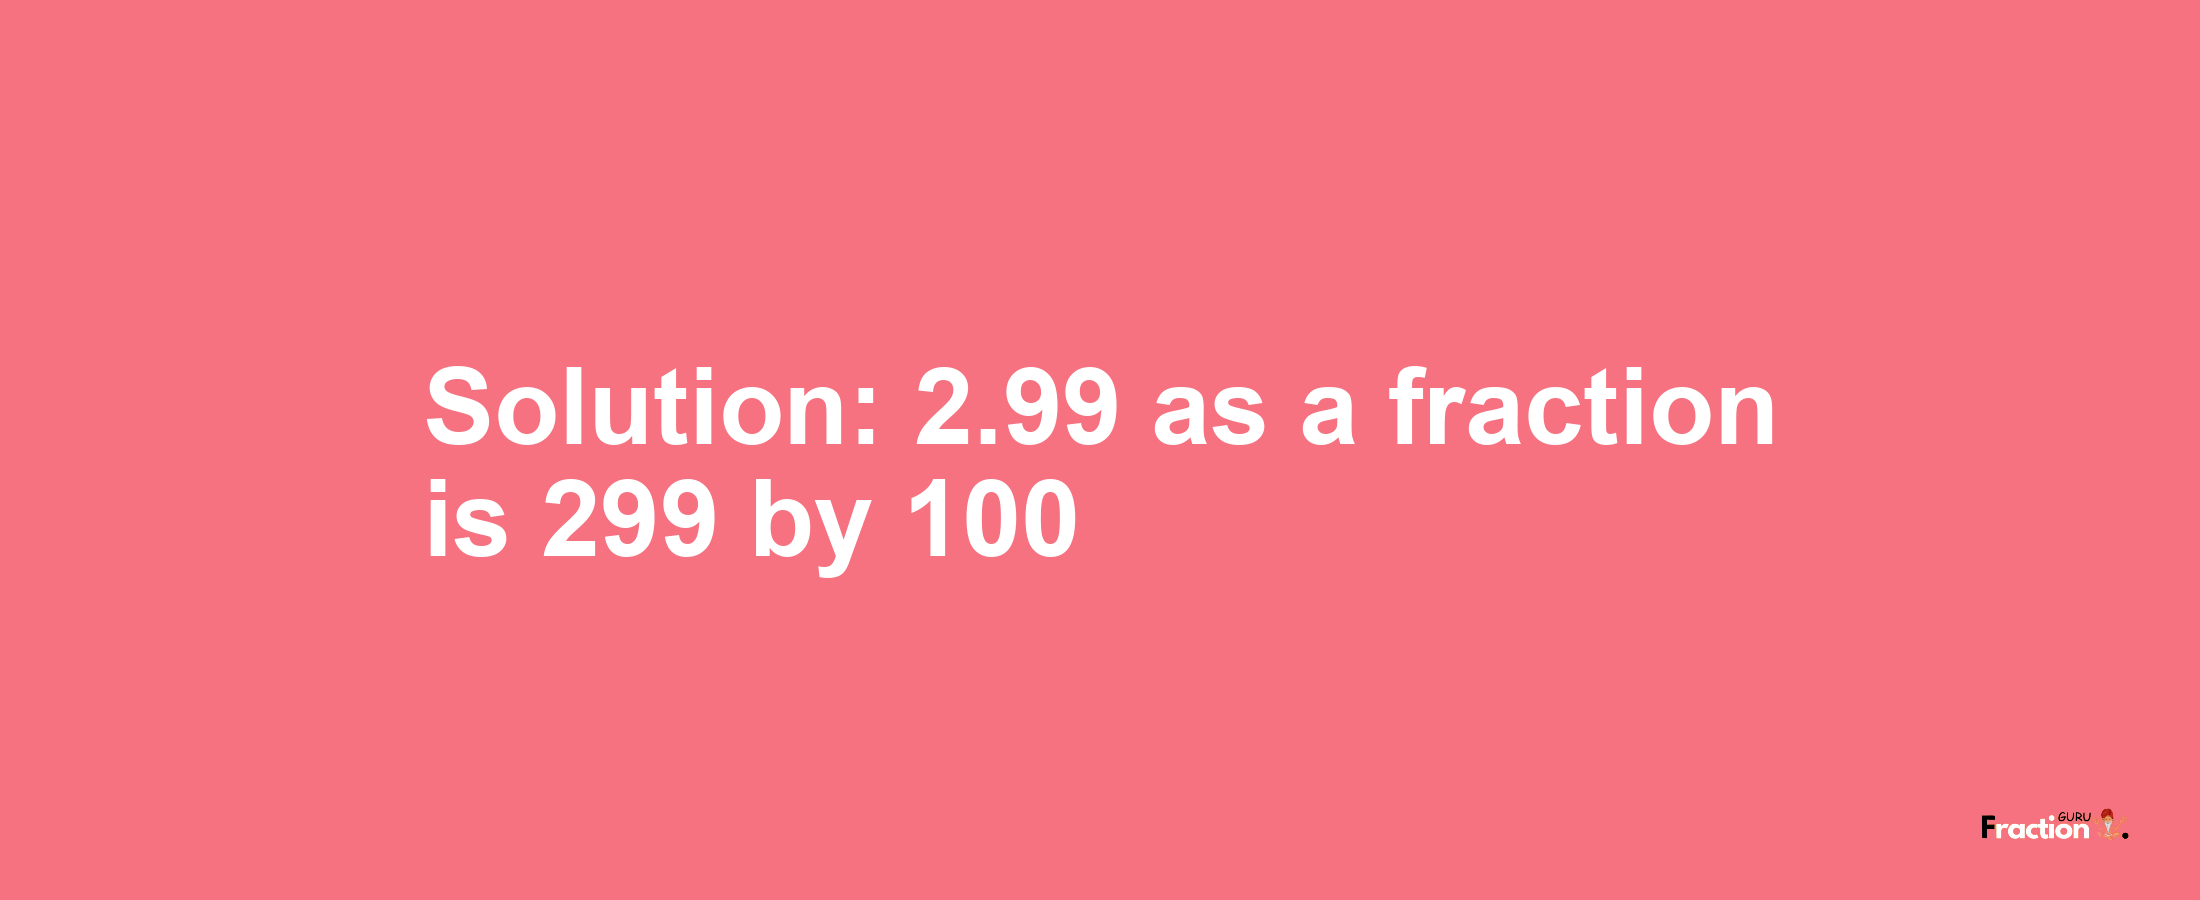 Solution:2.99 as a fraction is 299/100